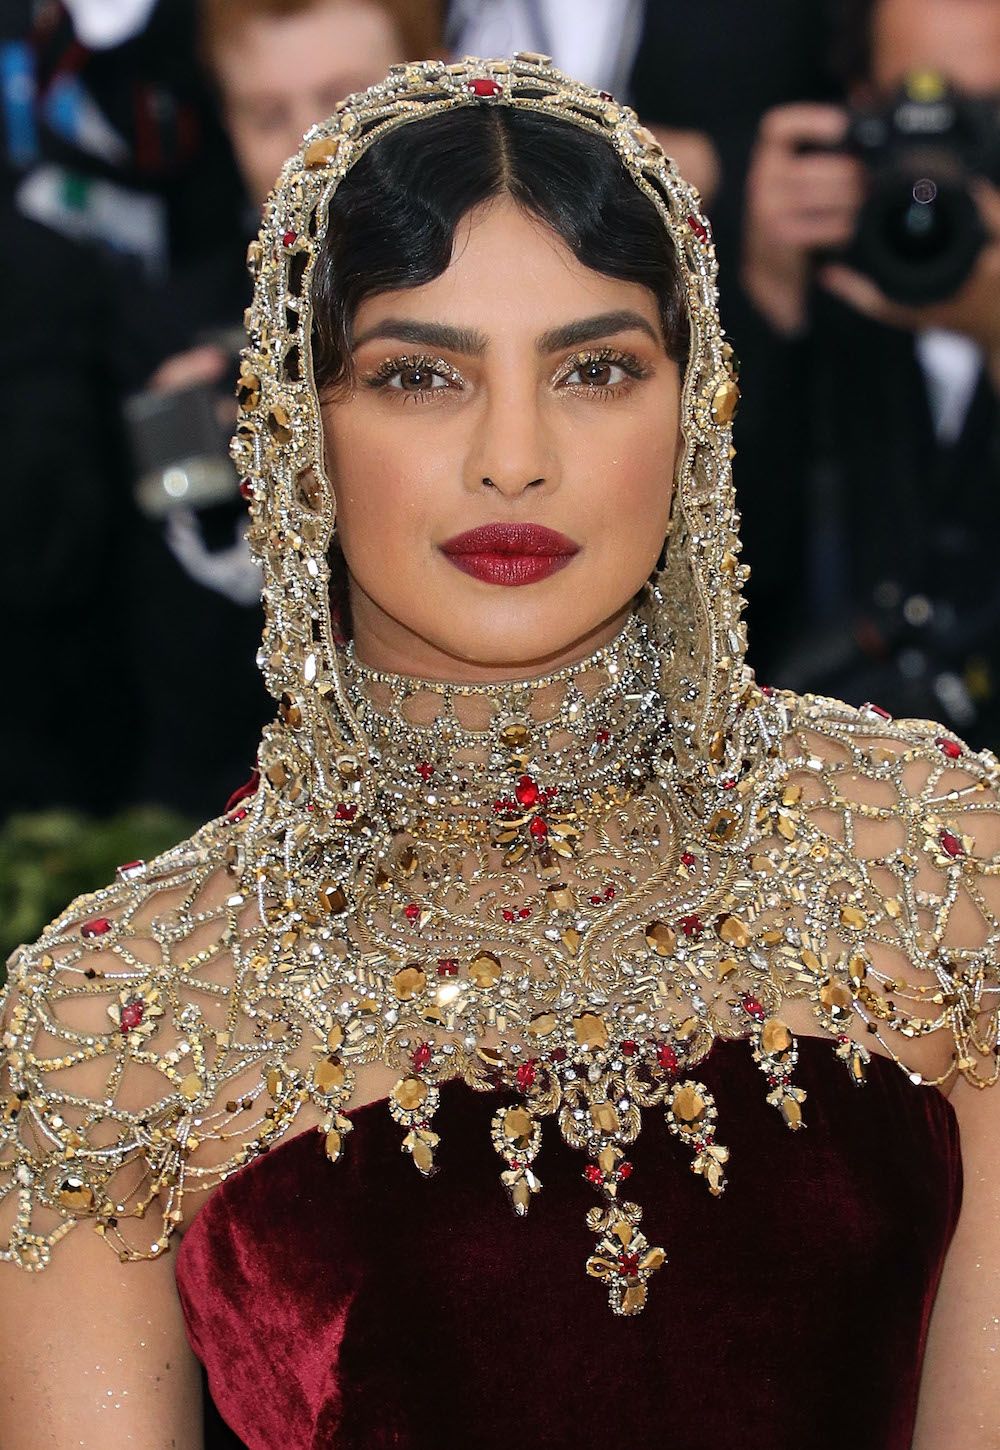 <p>                     We love it when the make-up pulls together an outfit, and Priyanka Chopra’s gold eyeshadow and dark red lip perfectly matched hers at the 2018 event—which had one of the most memorable Met Gala themes, “Heavenly Bodies: Fashion and the Catholic Imagination”.                   </p>